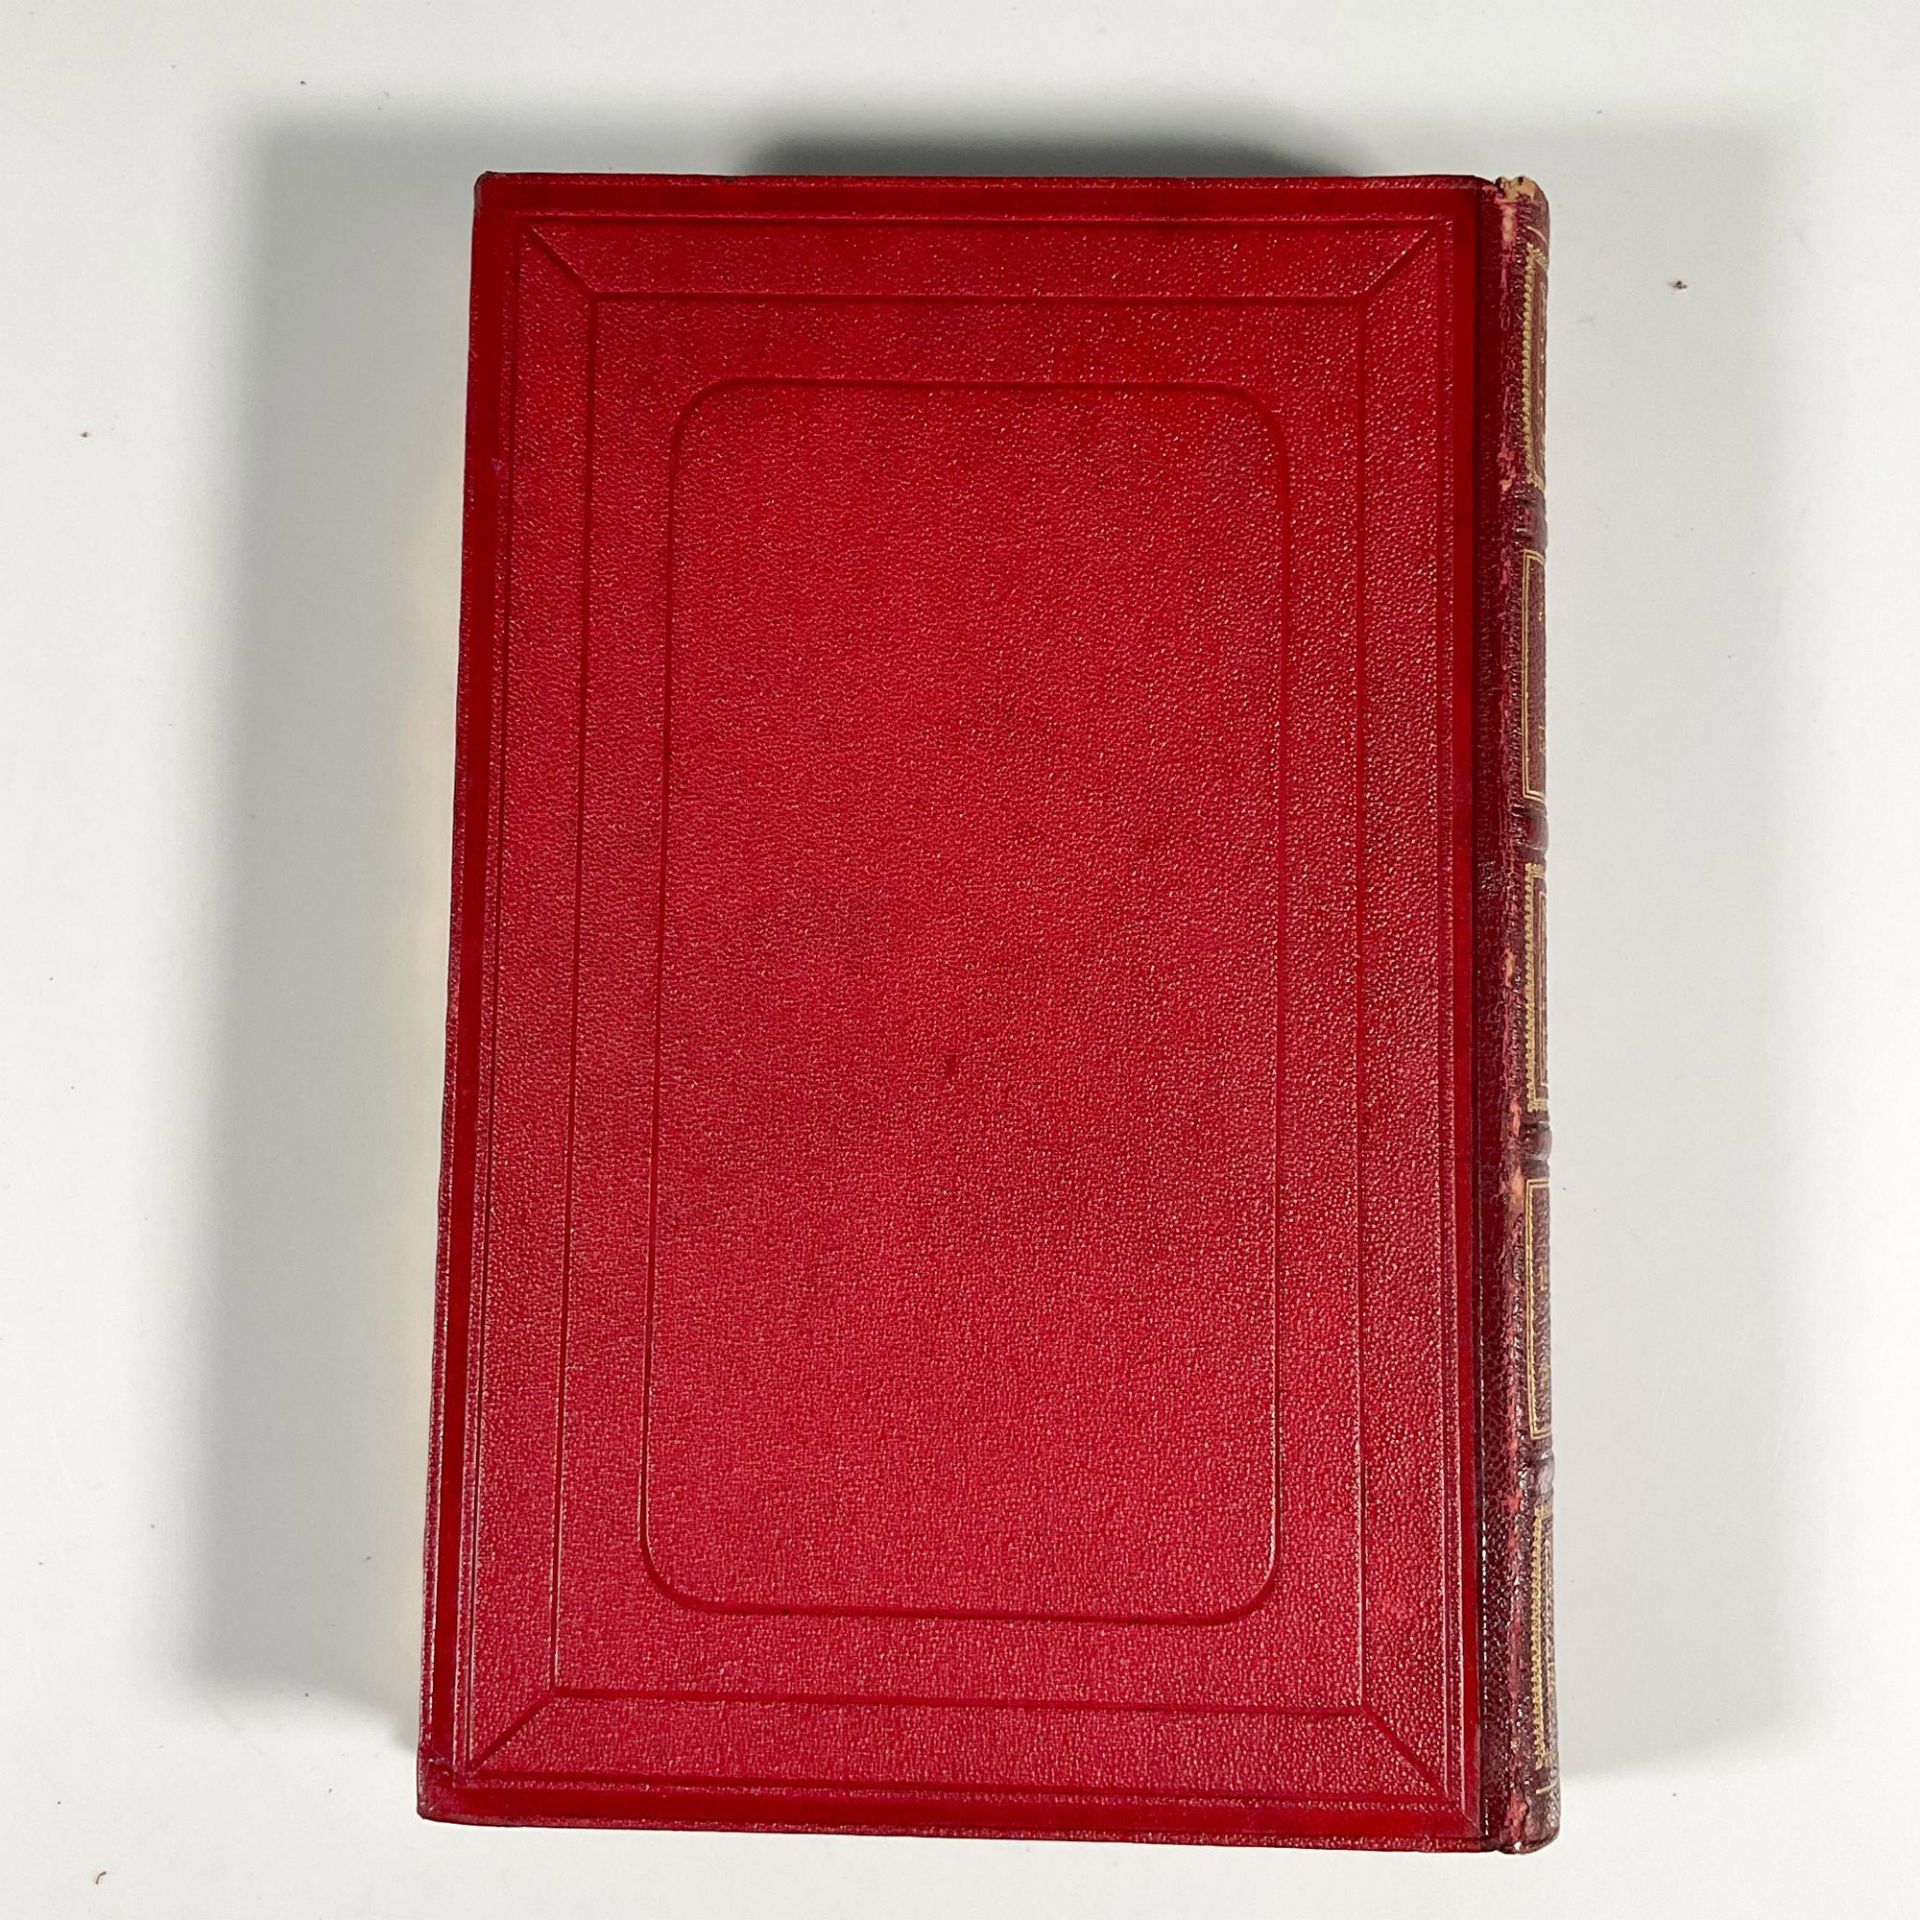 Jules Verne, Robur le Conquerant, Aux Harpons, Red Cover - Image 3 of 4